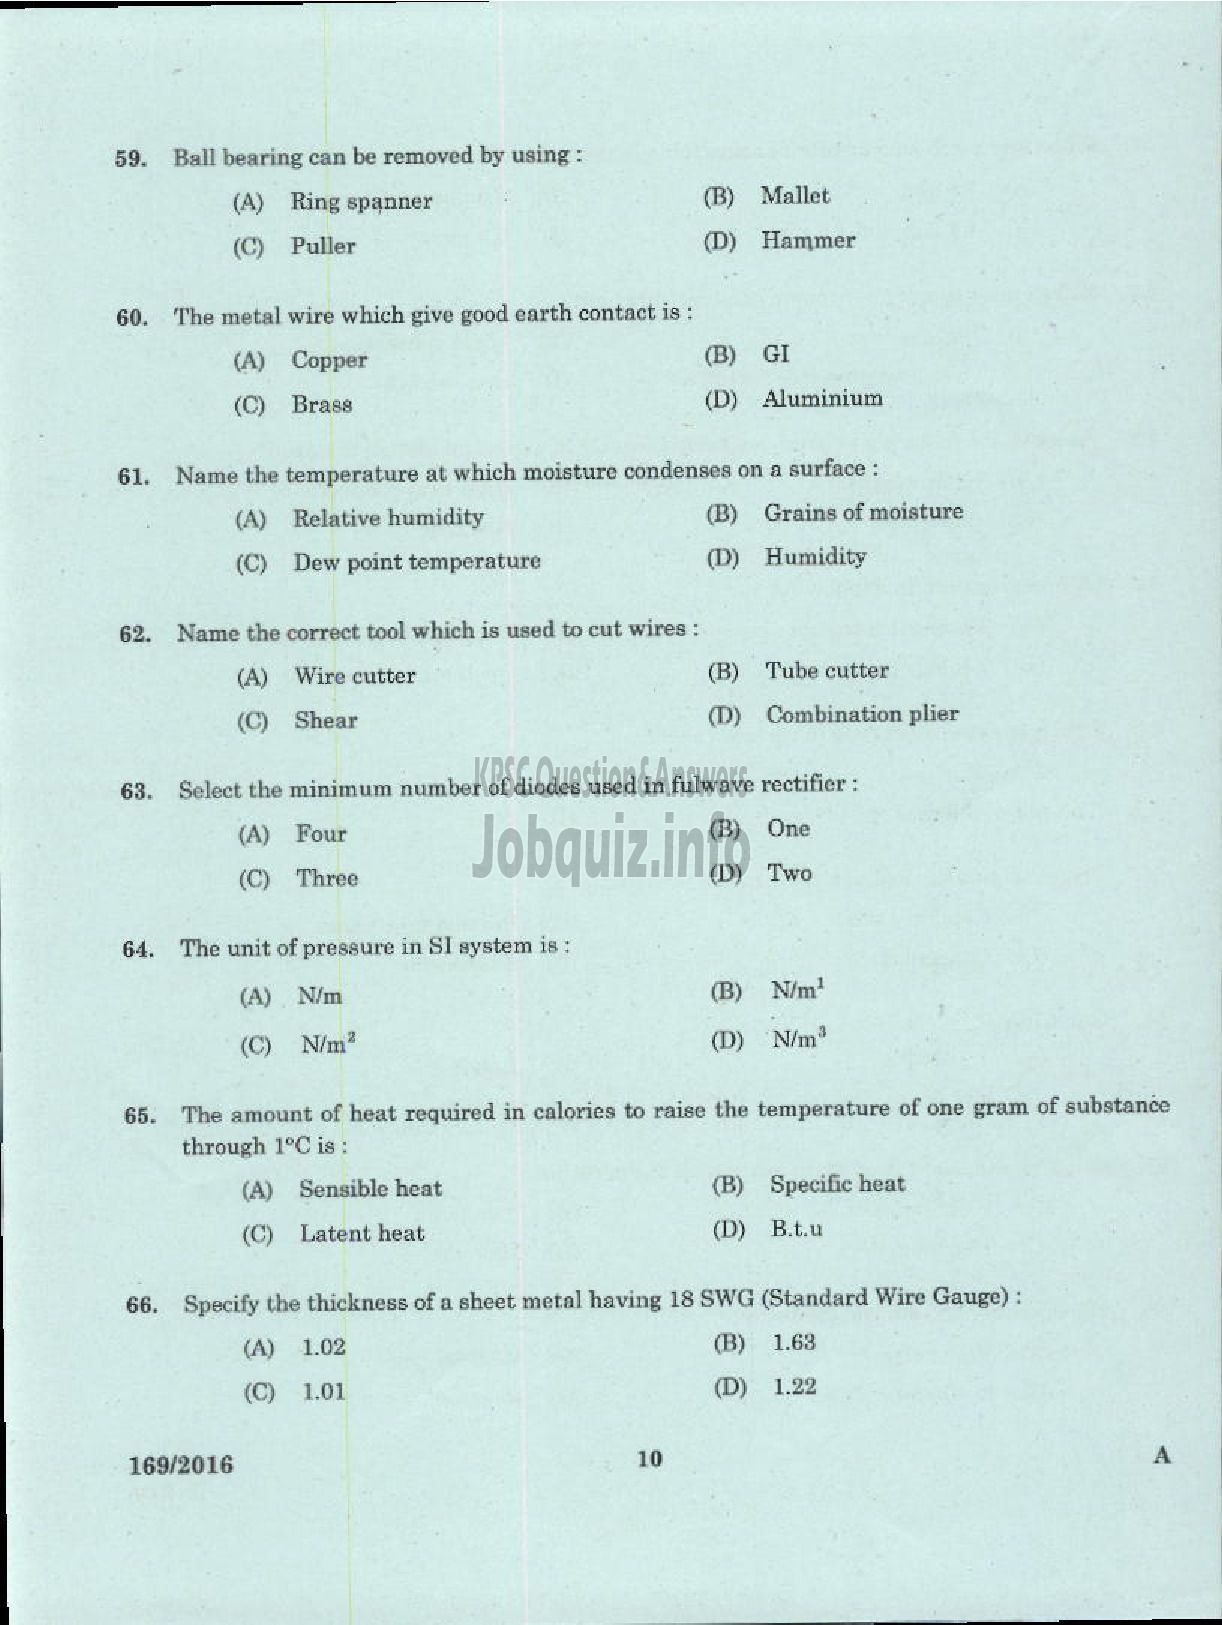 Kerala PSC Question Paper - TRADESMAN REFRIGERATION AND AIR CONDITIONING TECHNICAL EDUCATION-8